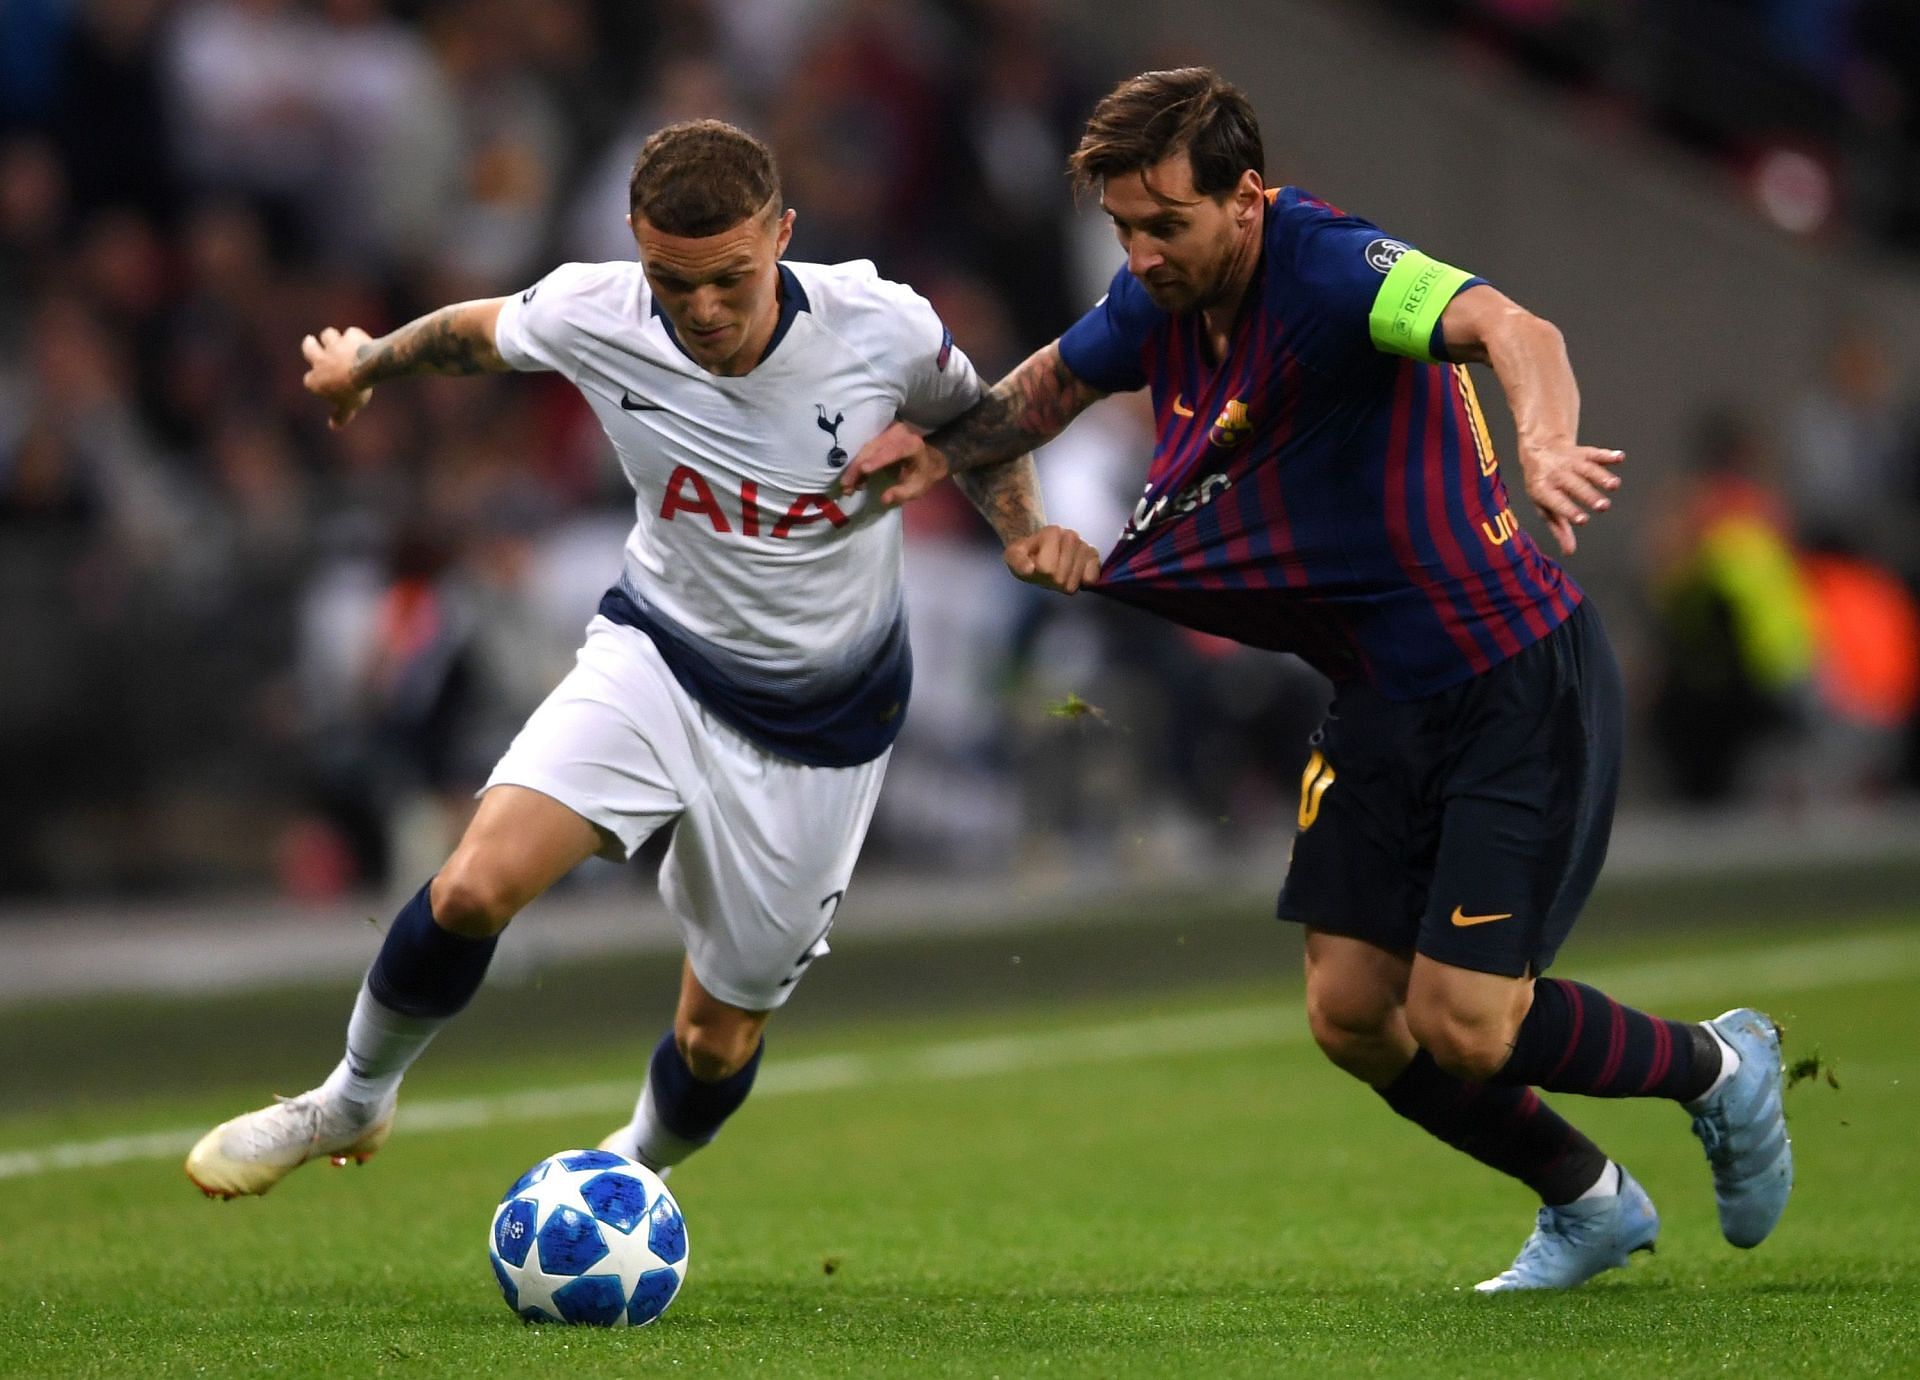 Kieran Trippier (left) on why Lionel Messi (right) is so hard to play against.